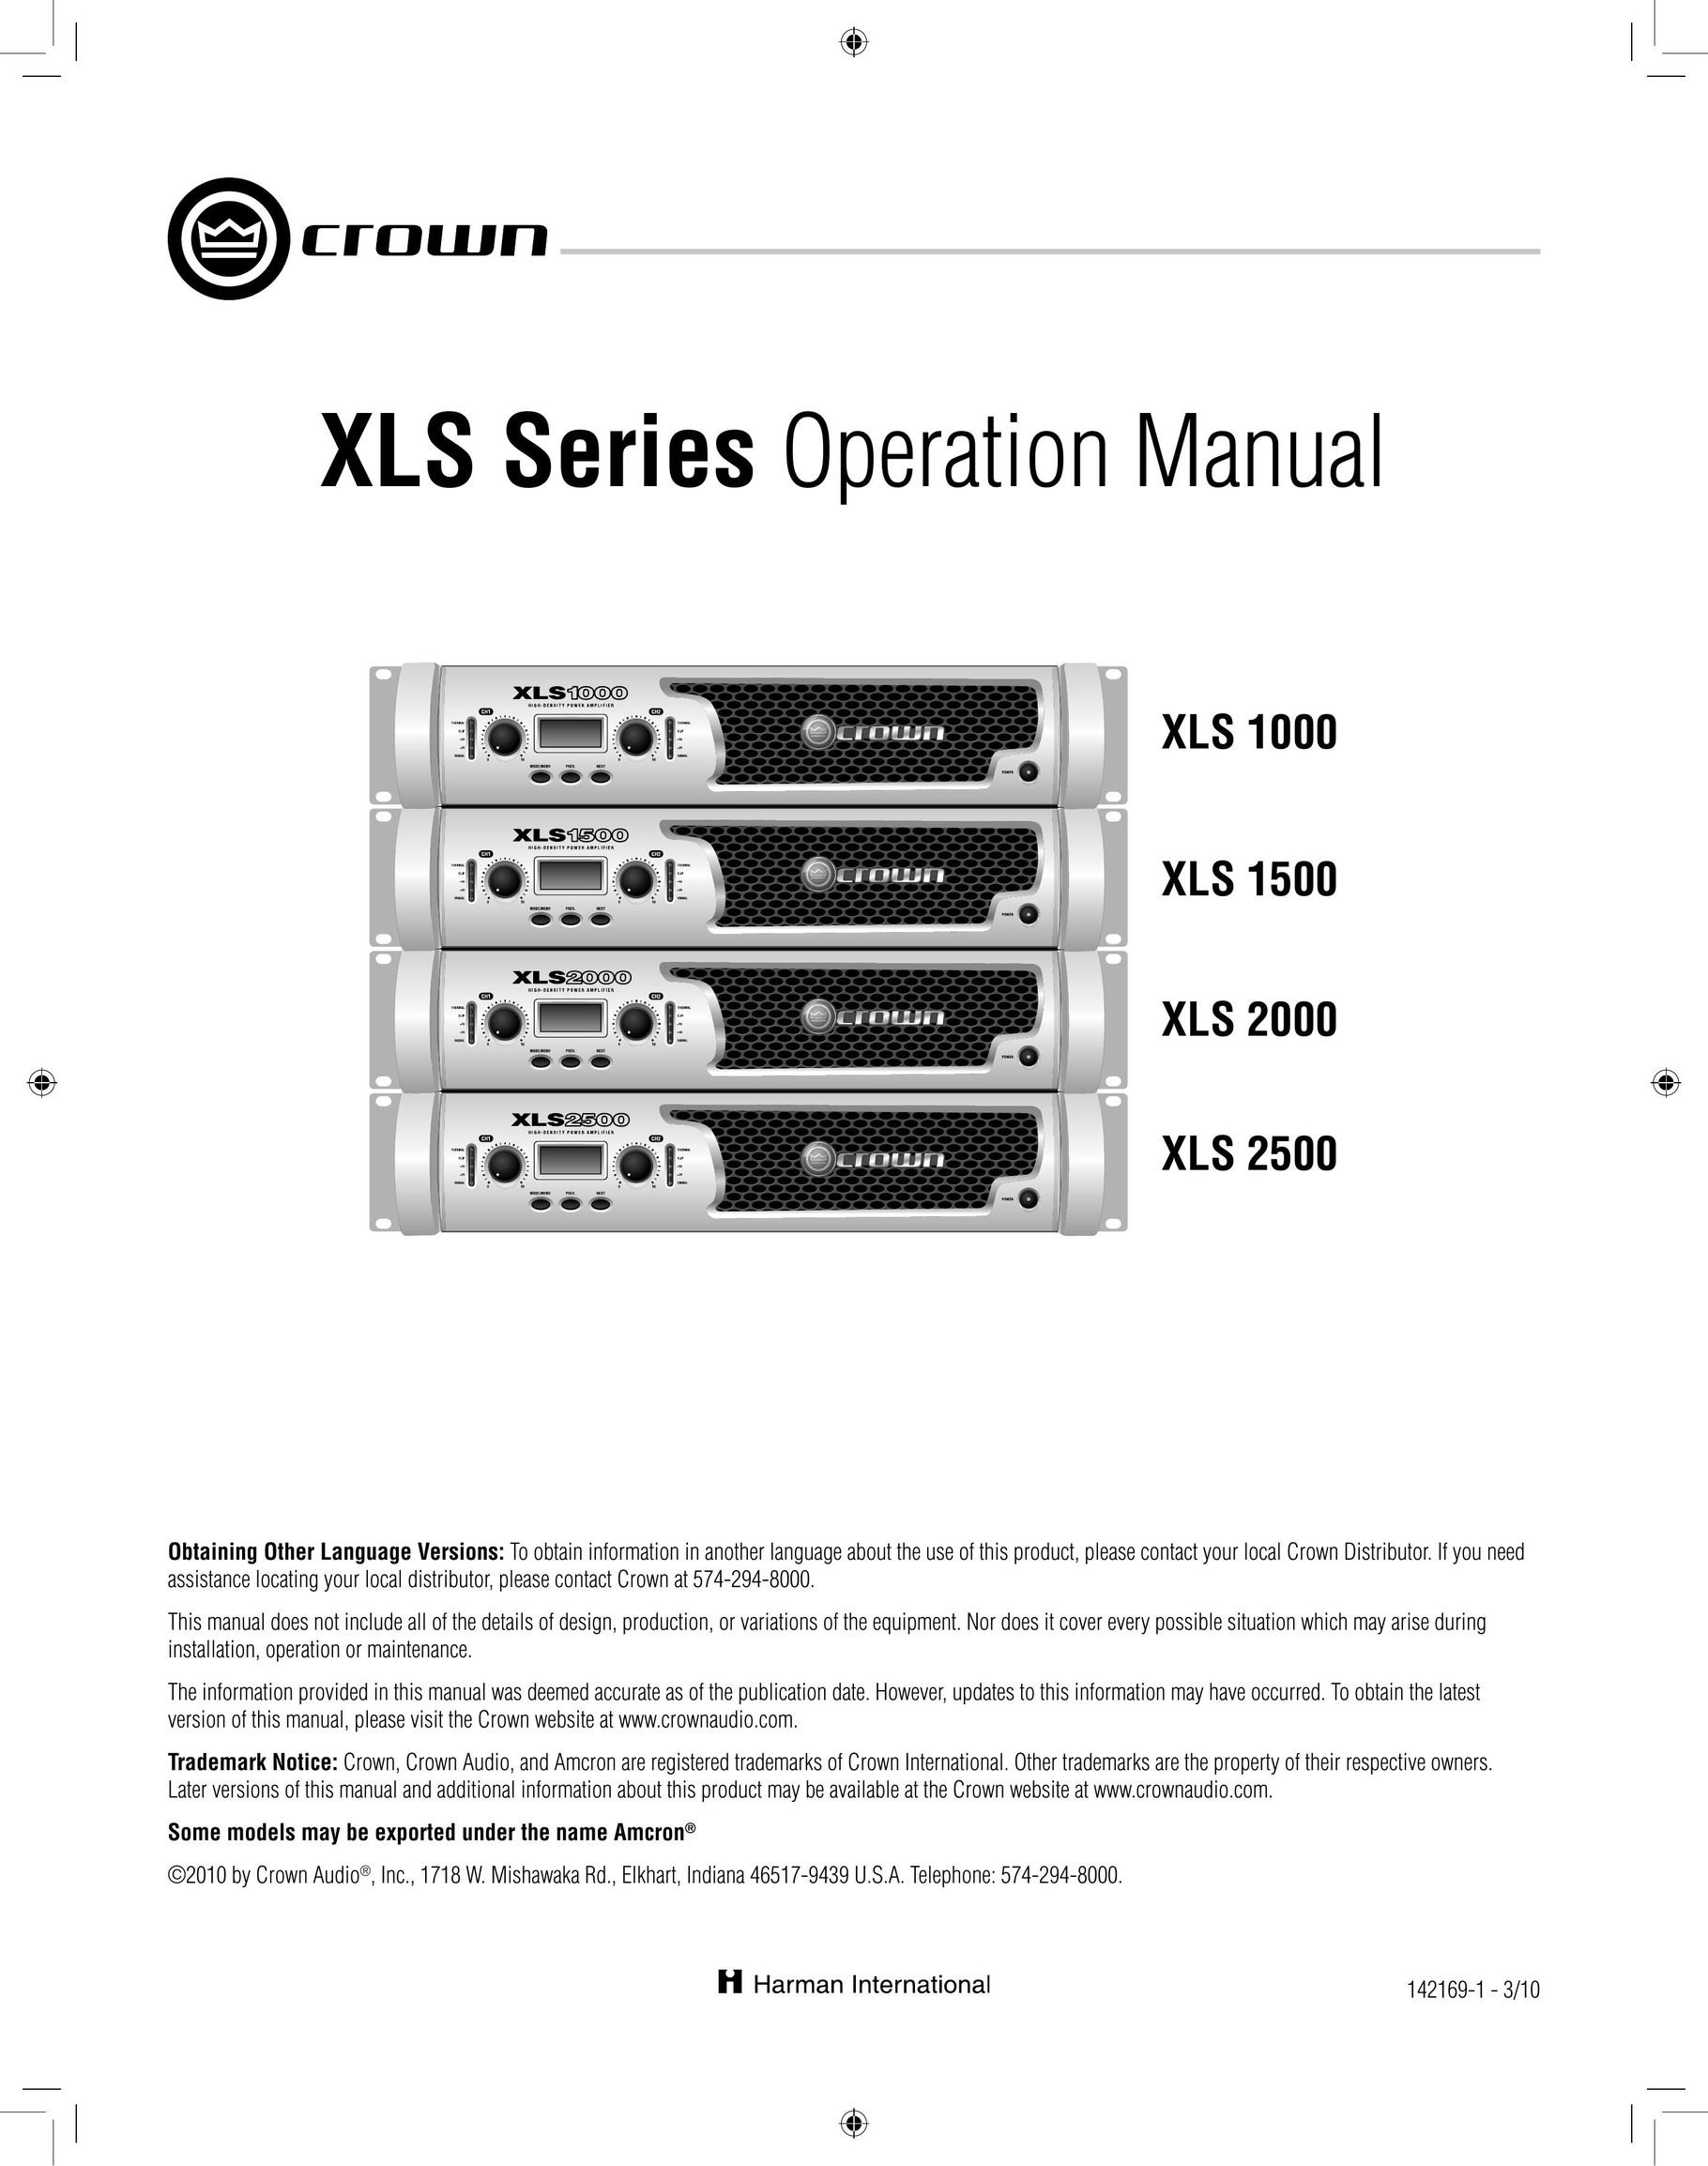 Crown XLS2500 Stereo Amplifier User Manual